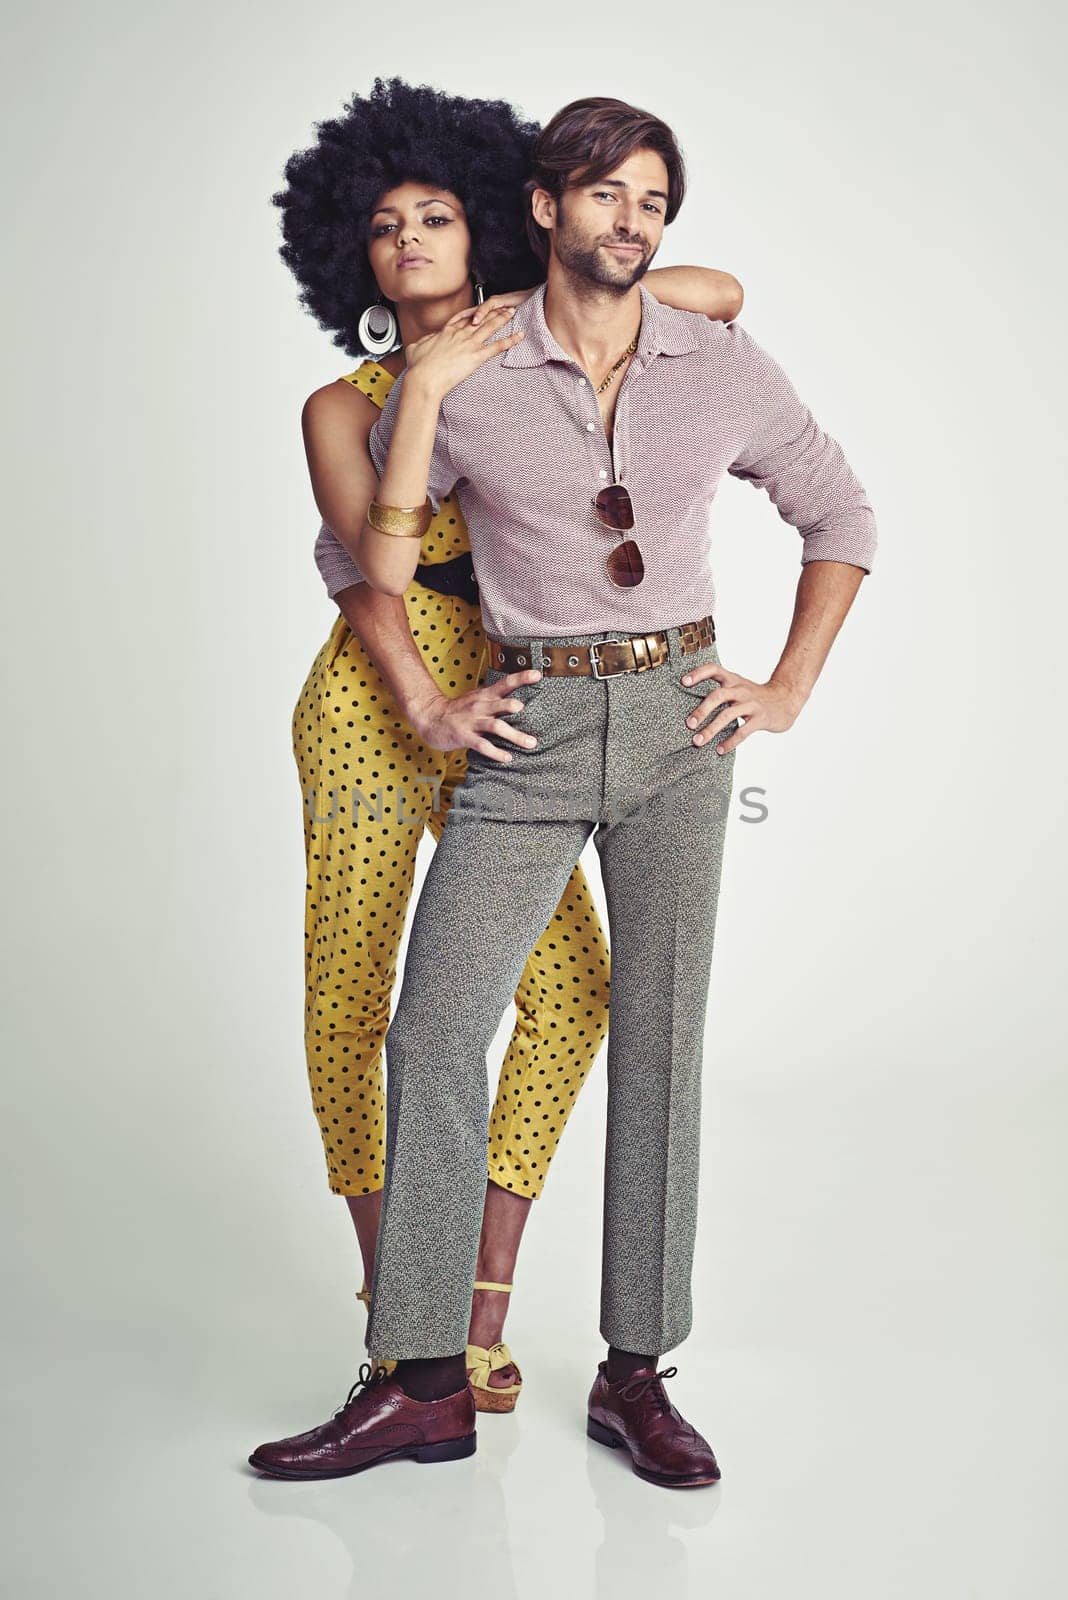 Couple, portrait and fashion in confidence for style, outfit or clothing on a gray studio background. Young interracial man and woman in stylish retro or vintage pants, shirt or jumpsuit with jewelry by YuriArcurs